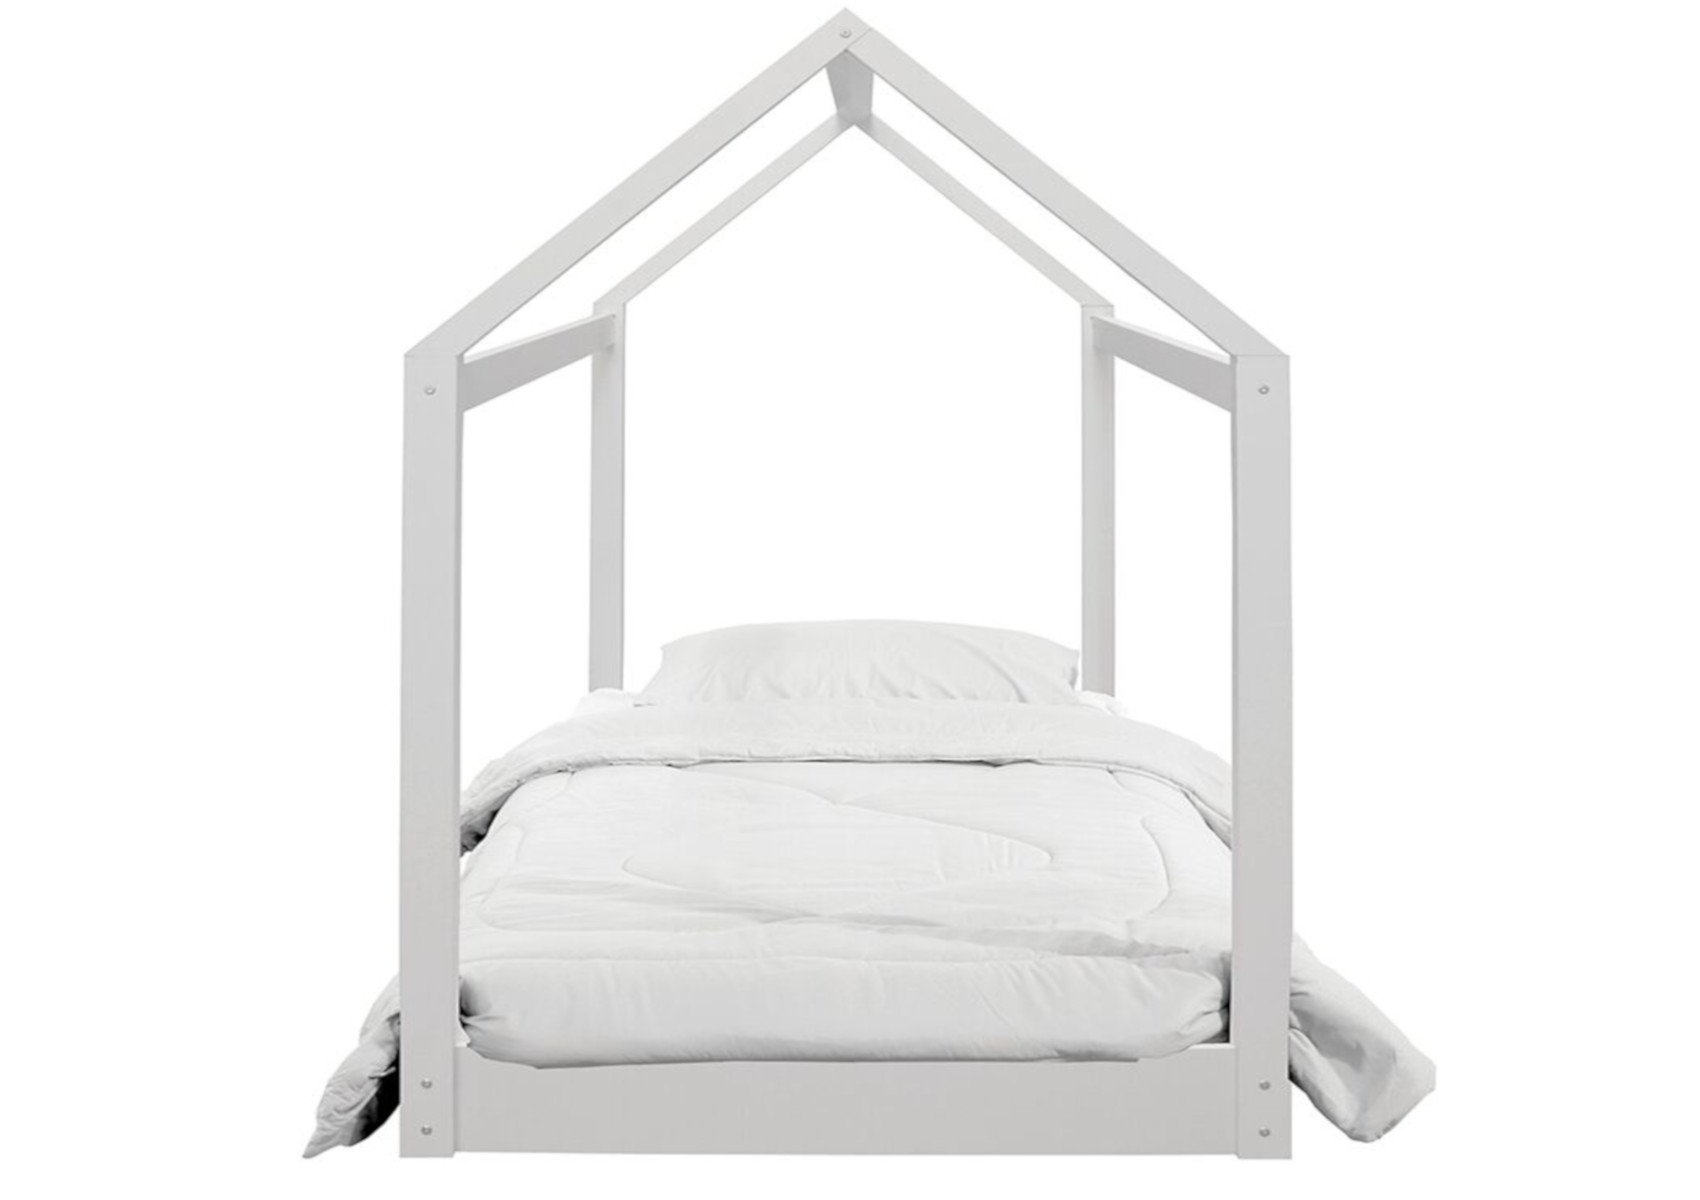 View Hickory White House Bed Frame Time4Sleep information